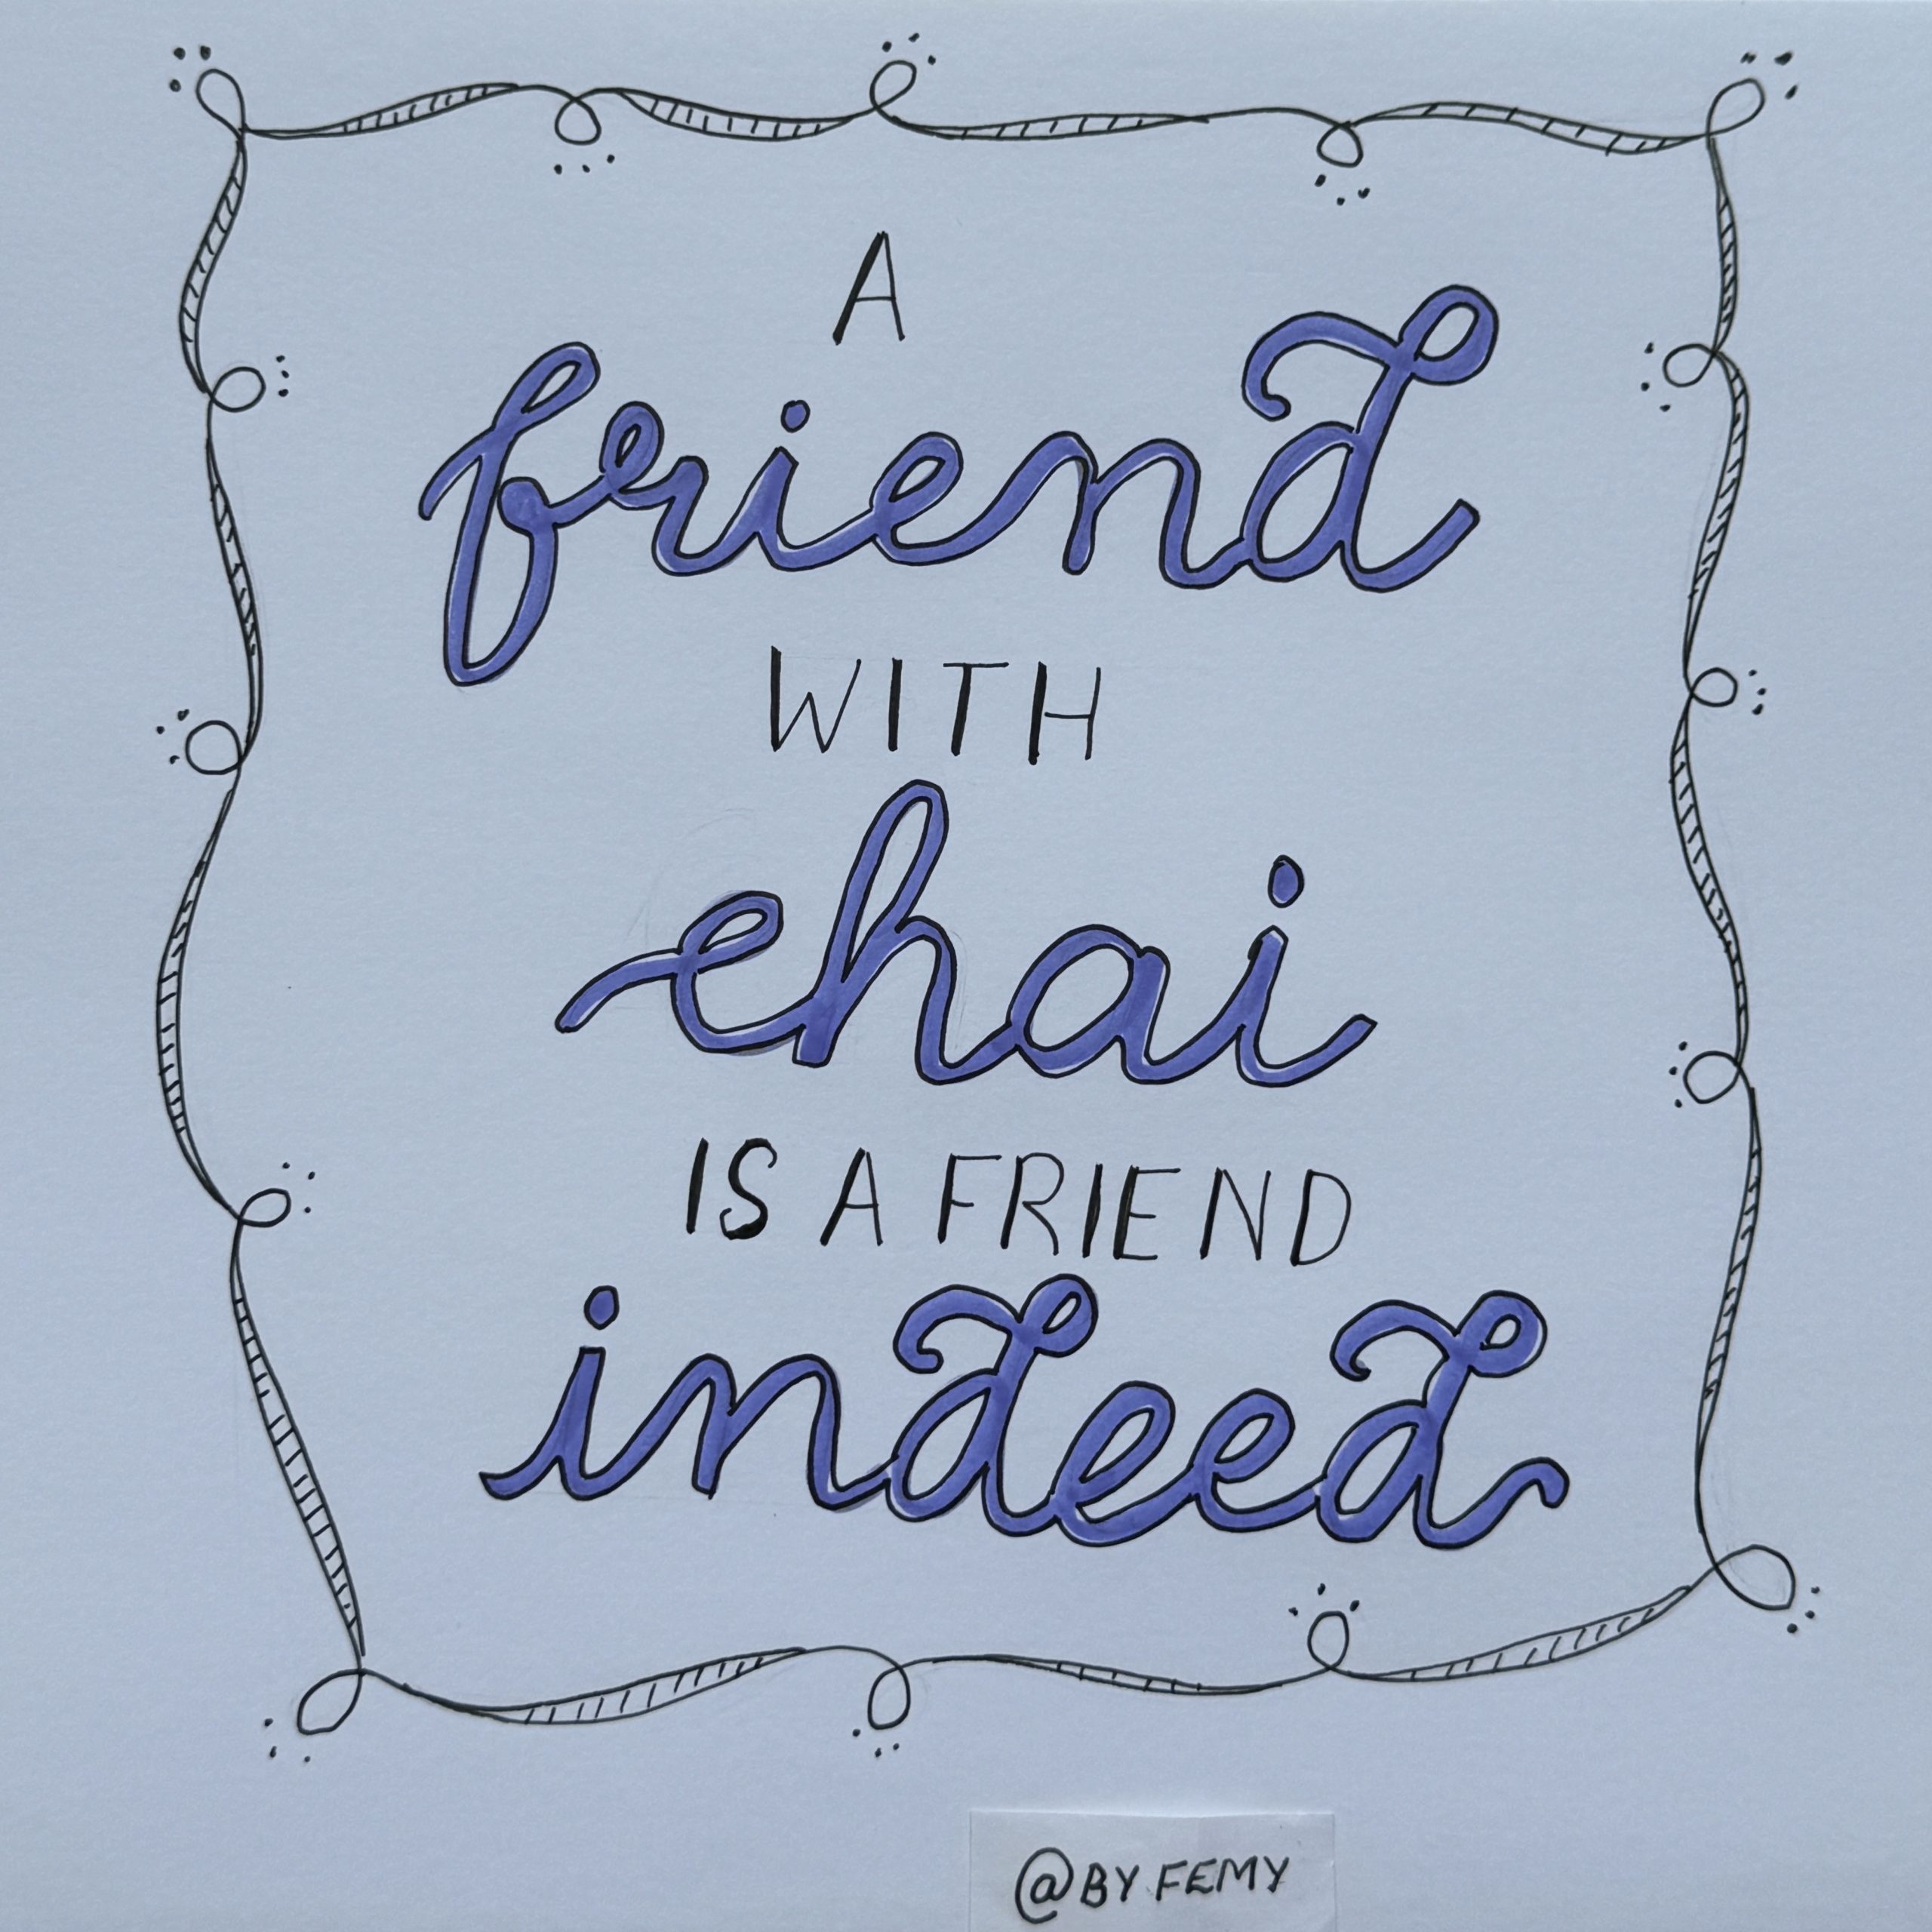 A friend with chai is a friend indeed